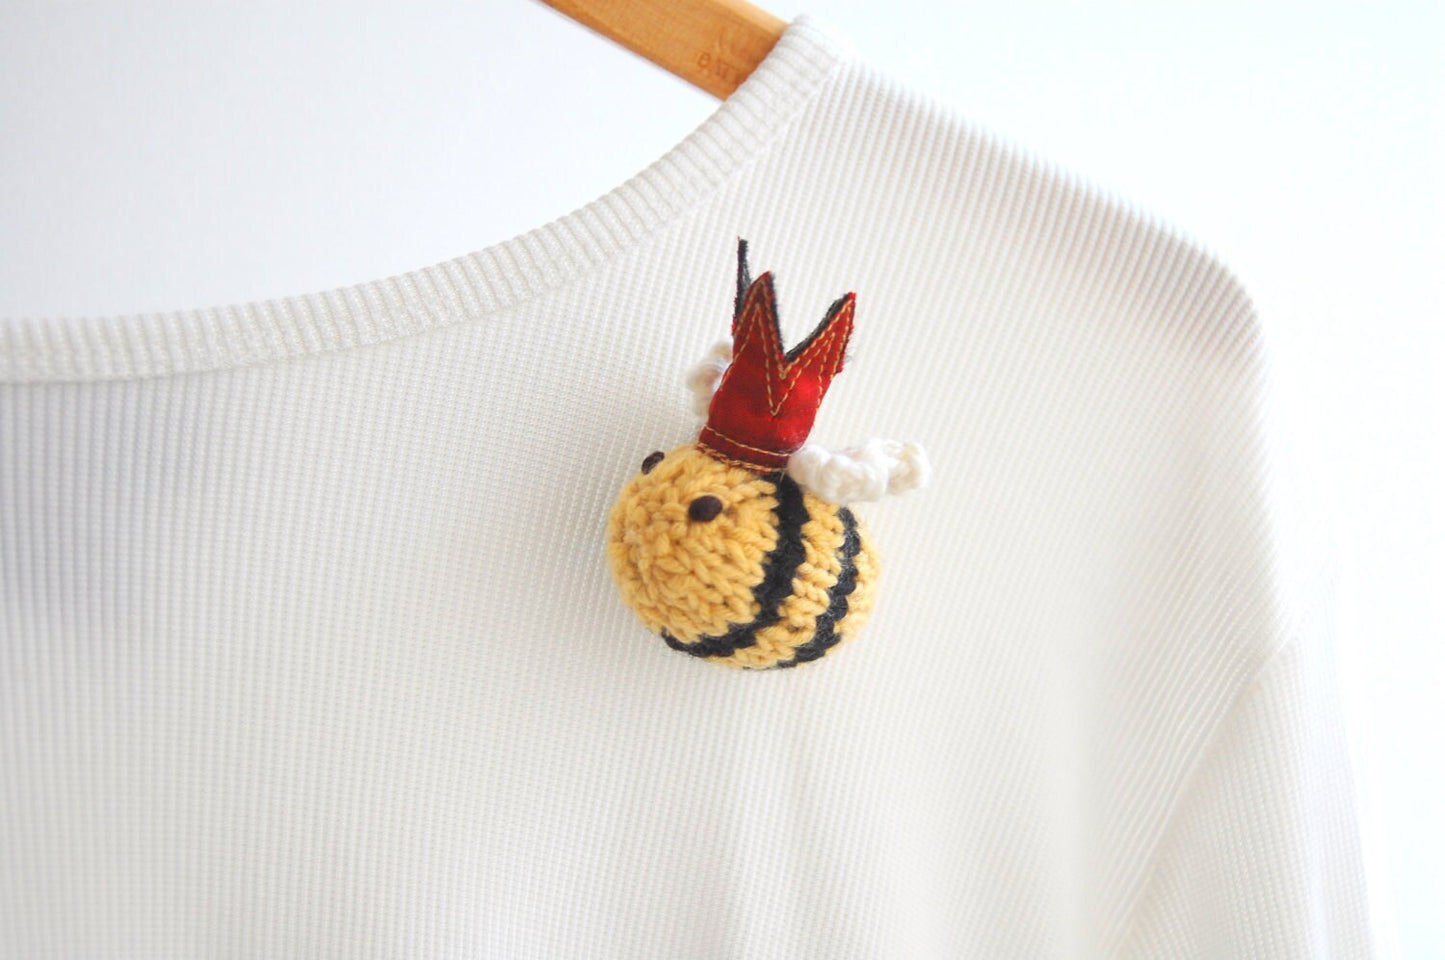 Queen Bee Brooch or Ornament, Knit Wool Bee with Silk Crown Lapel Pin